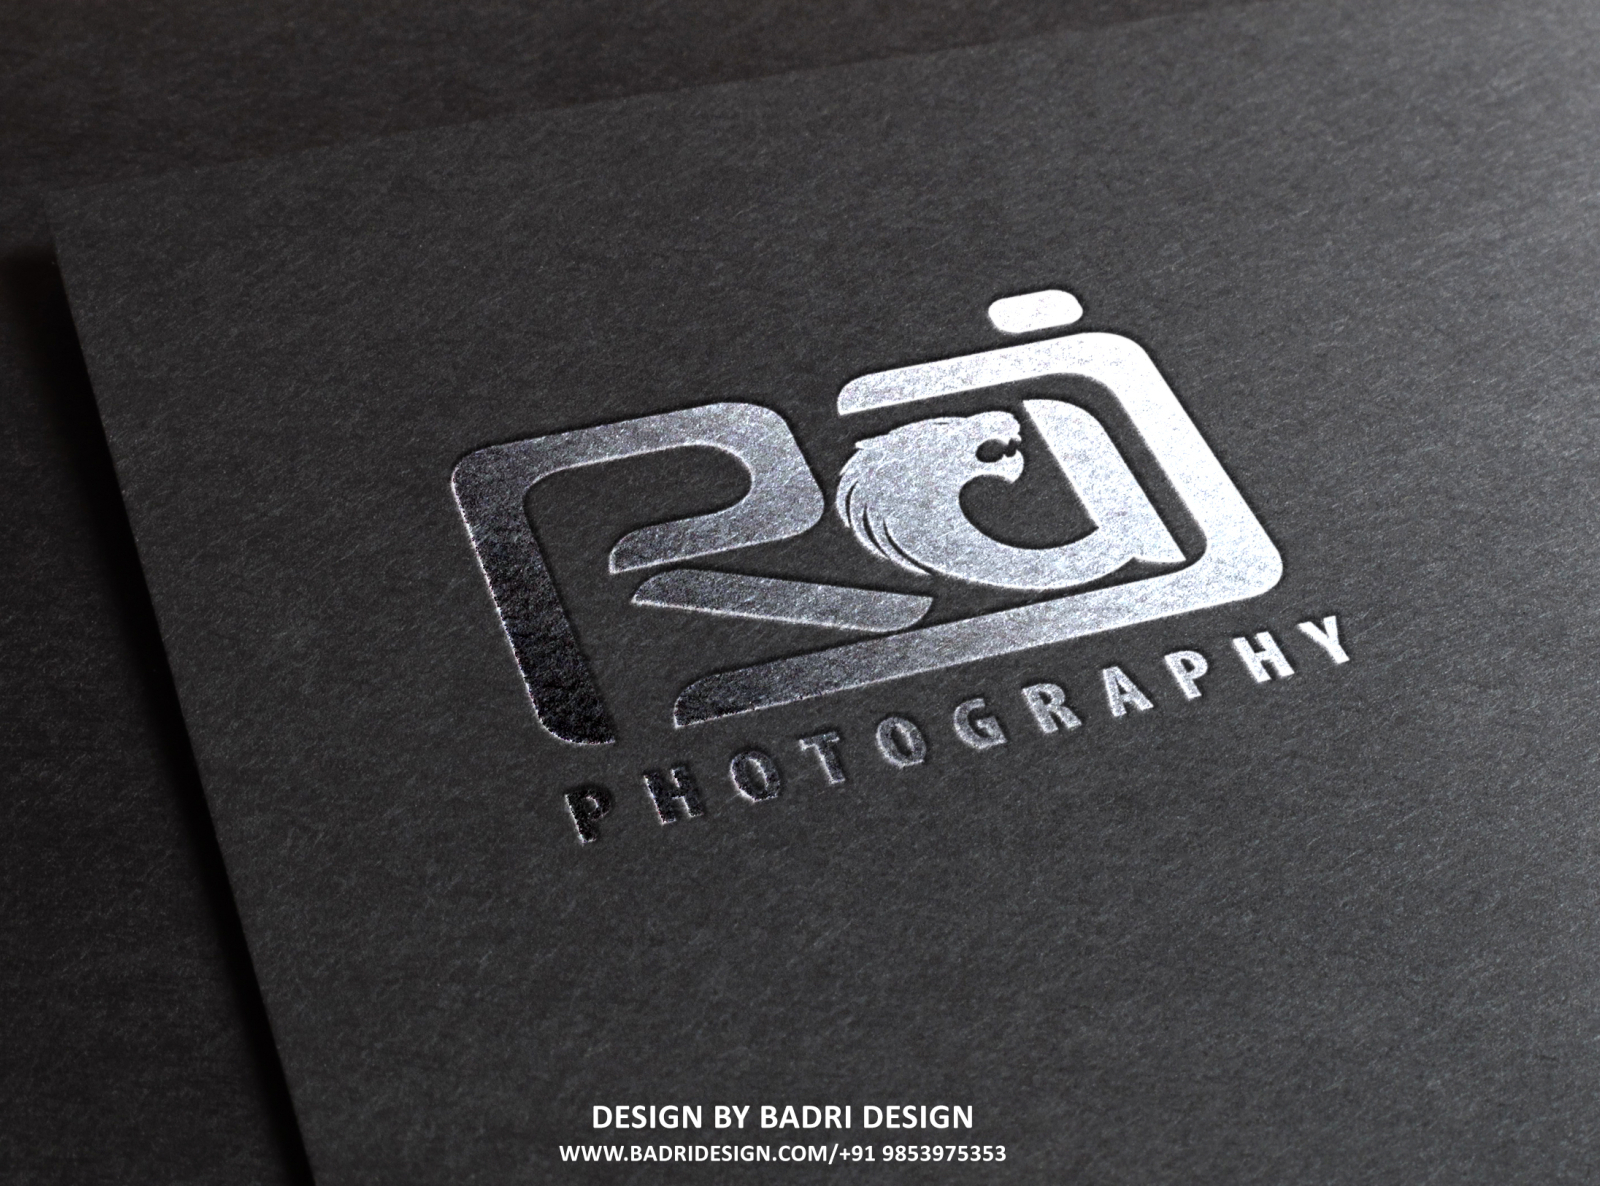 Photography Logo Maker - Create a Logo Design in Minutes | Tailor Brands